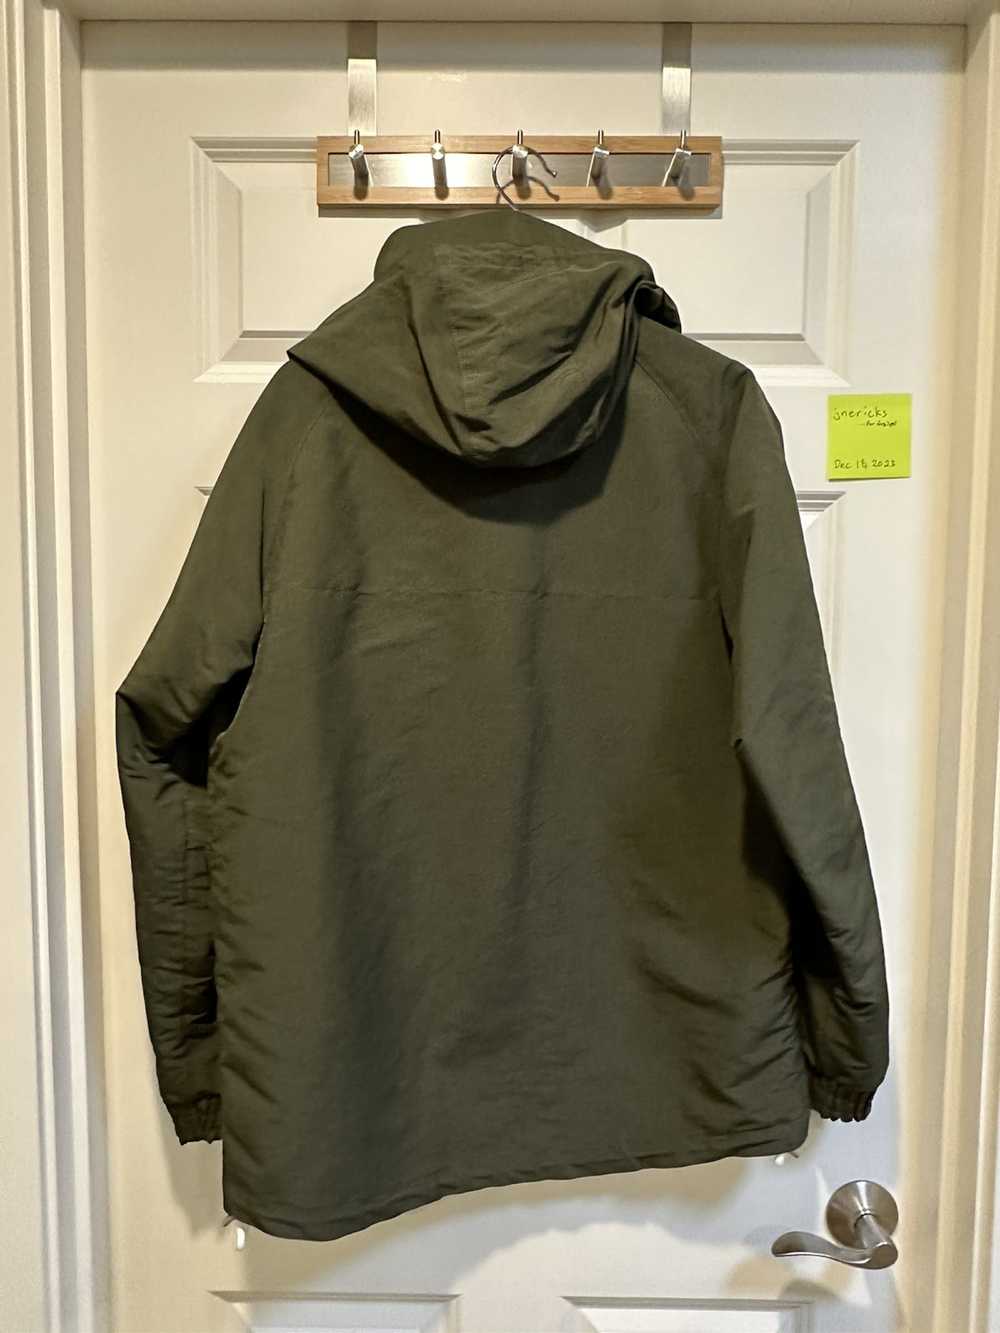 Vintage Pullover Jacket Army Green - image 2